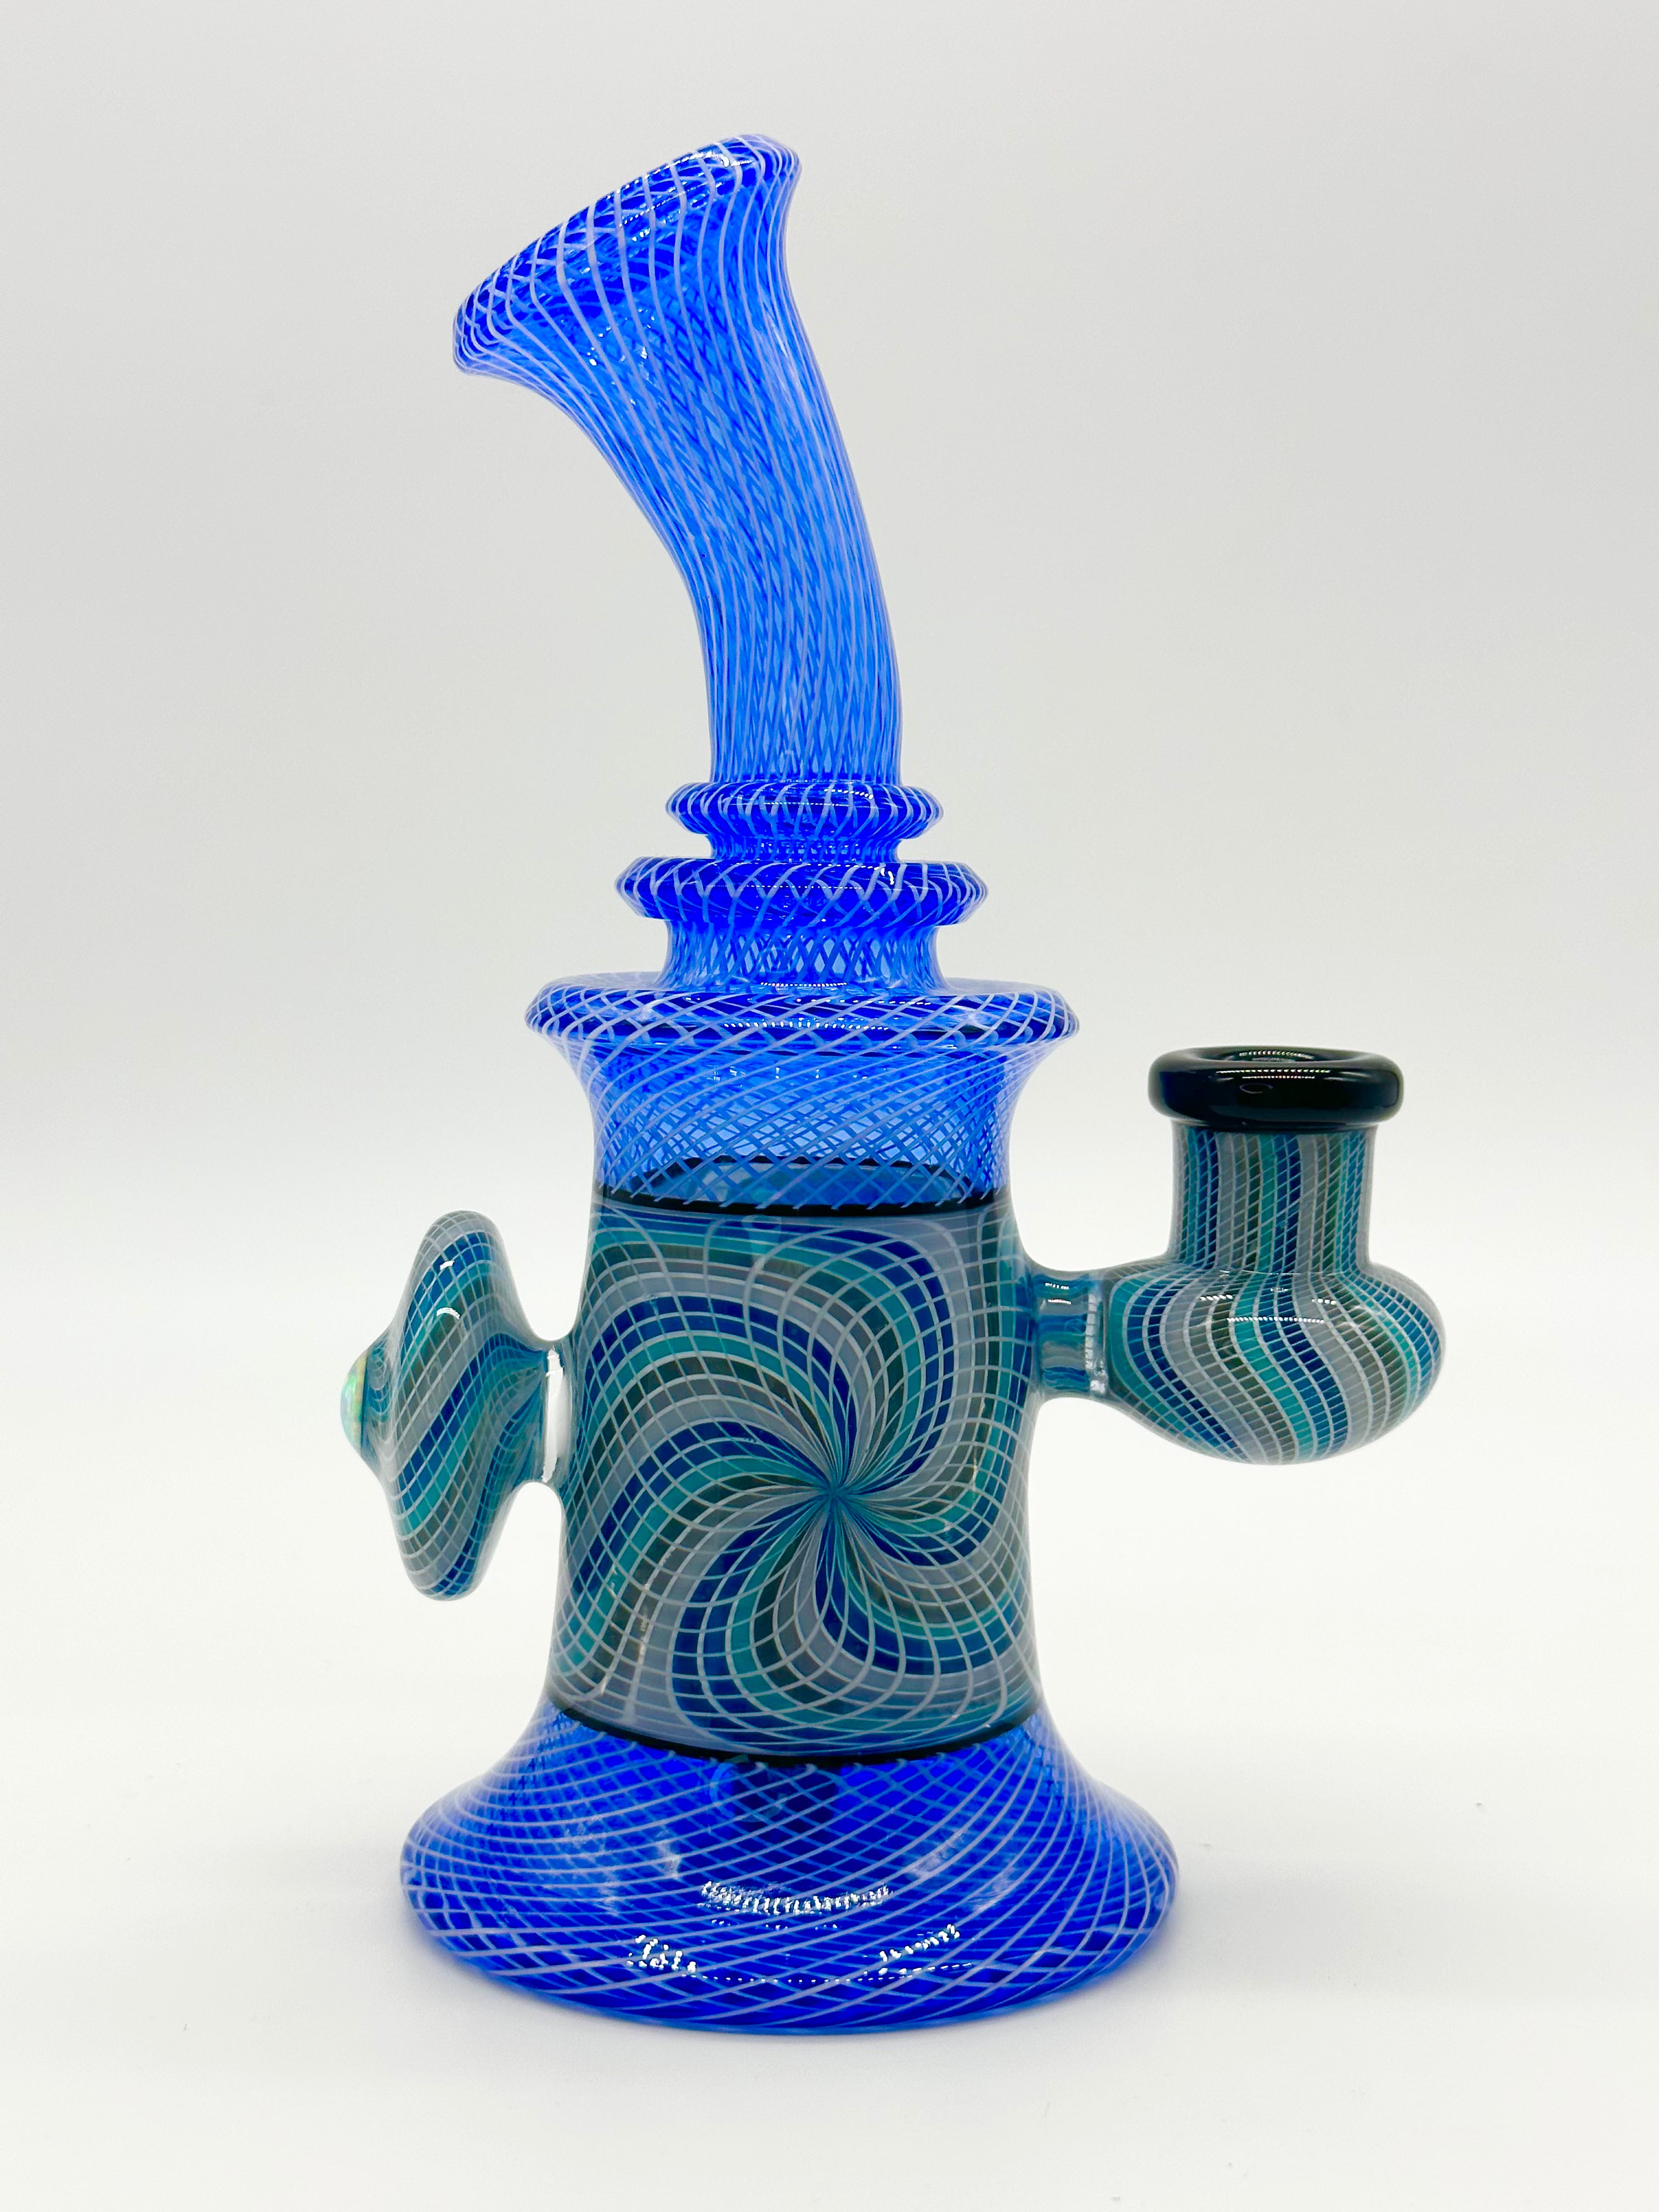 All Dab Rig Products